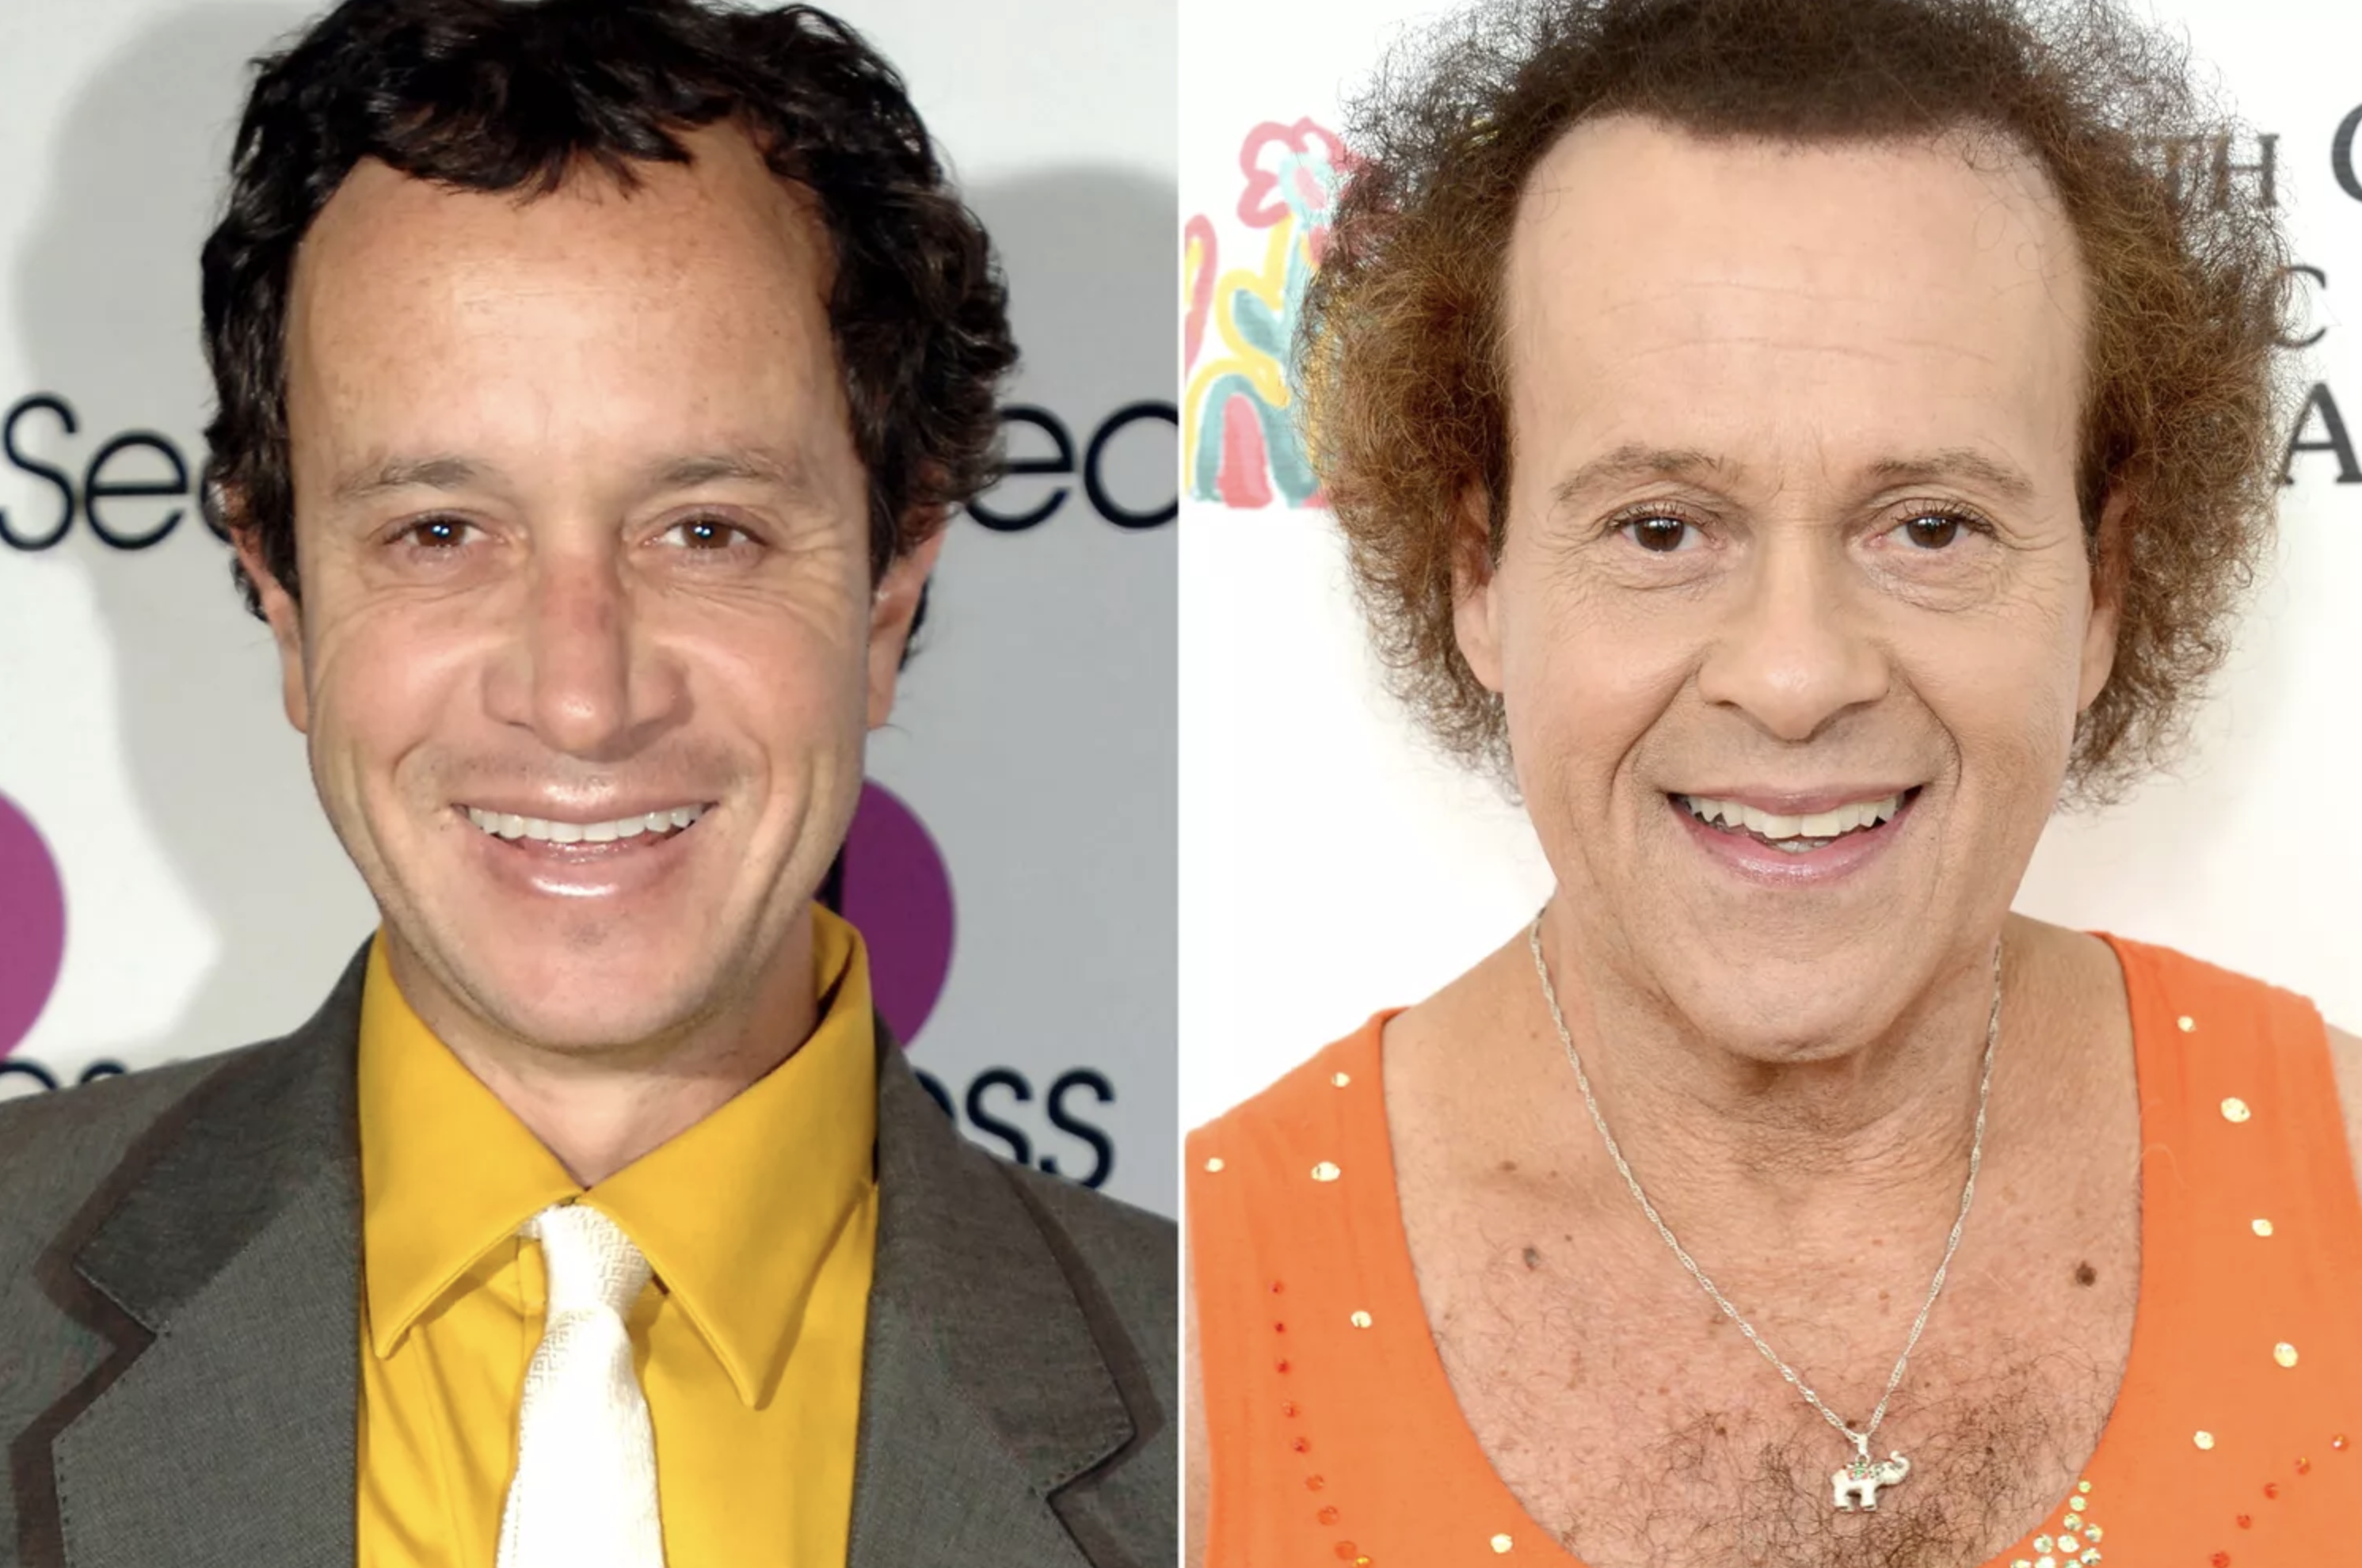 Pauly Shore to star as Richard Simmons in biopic